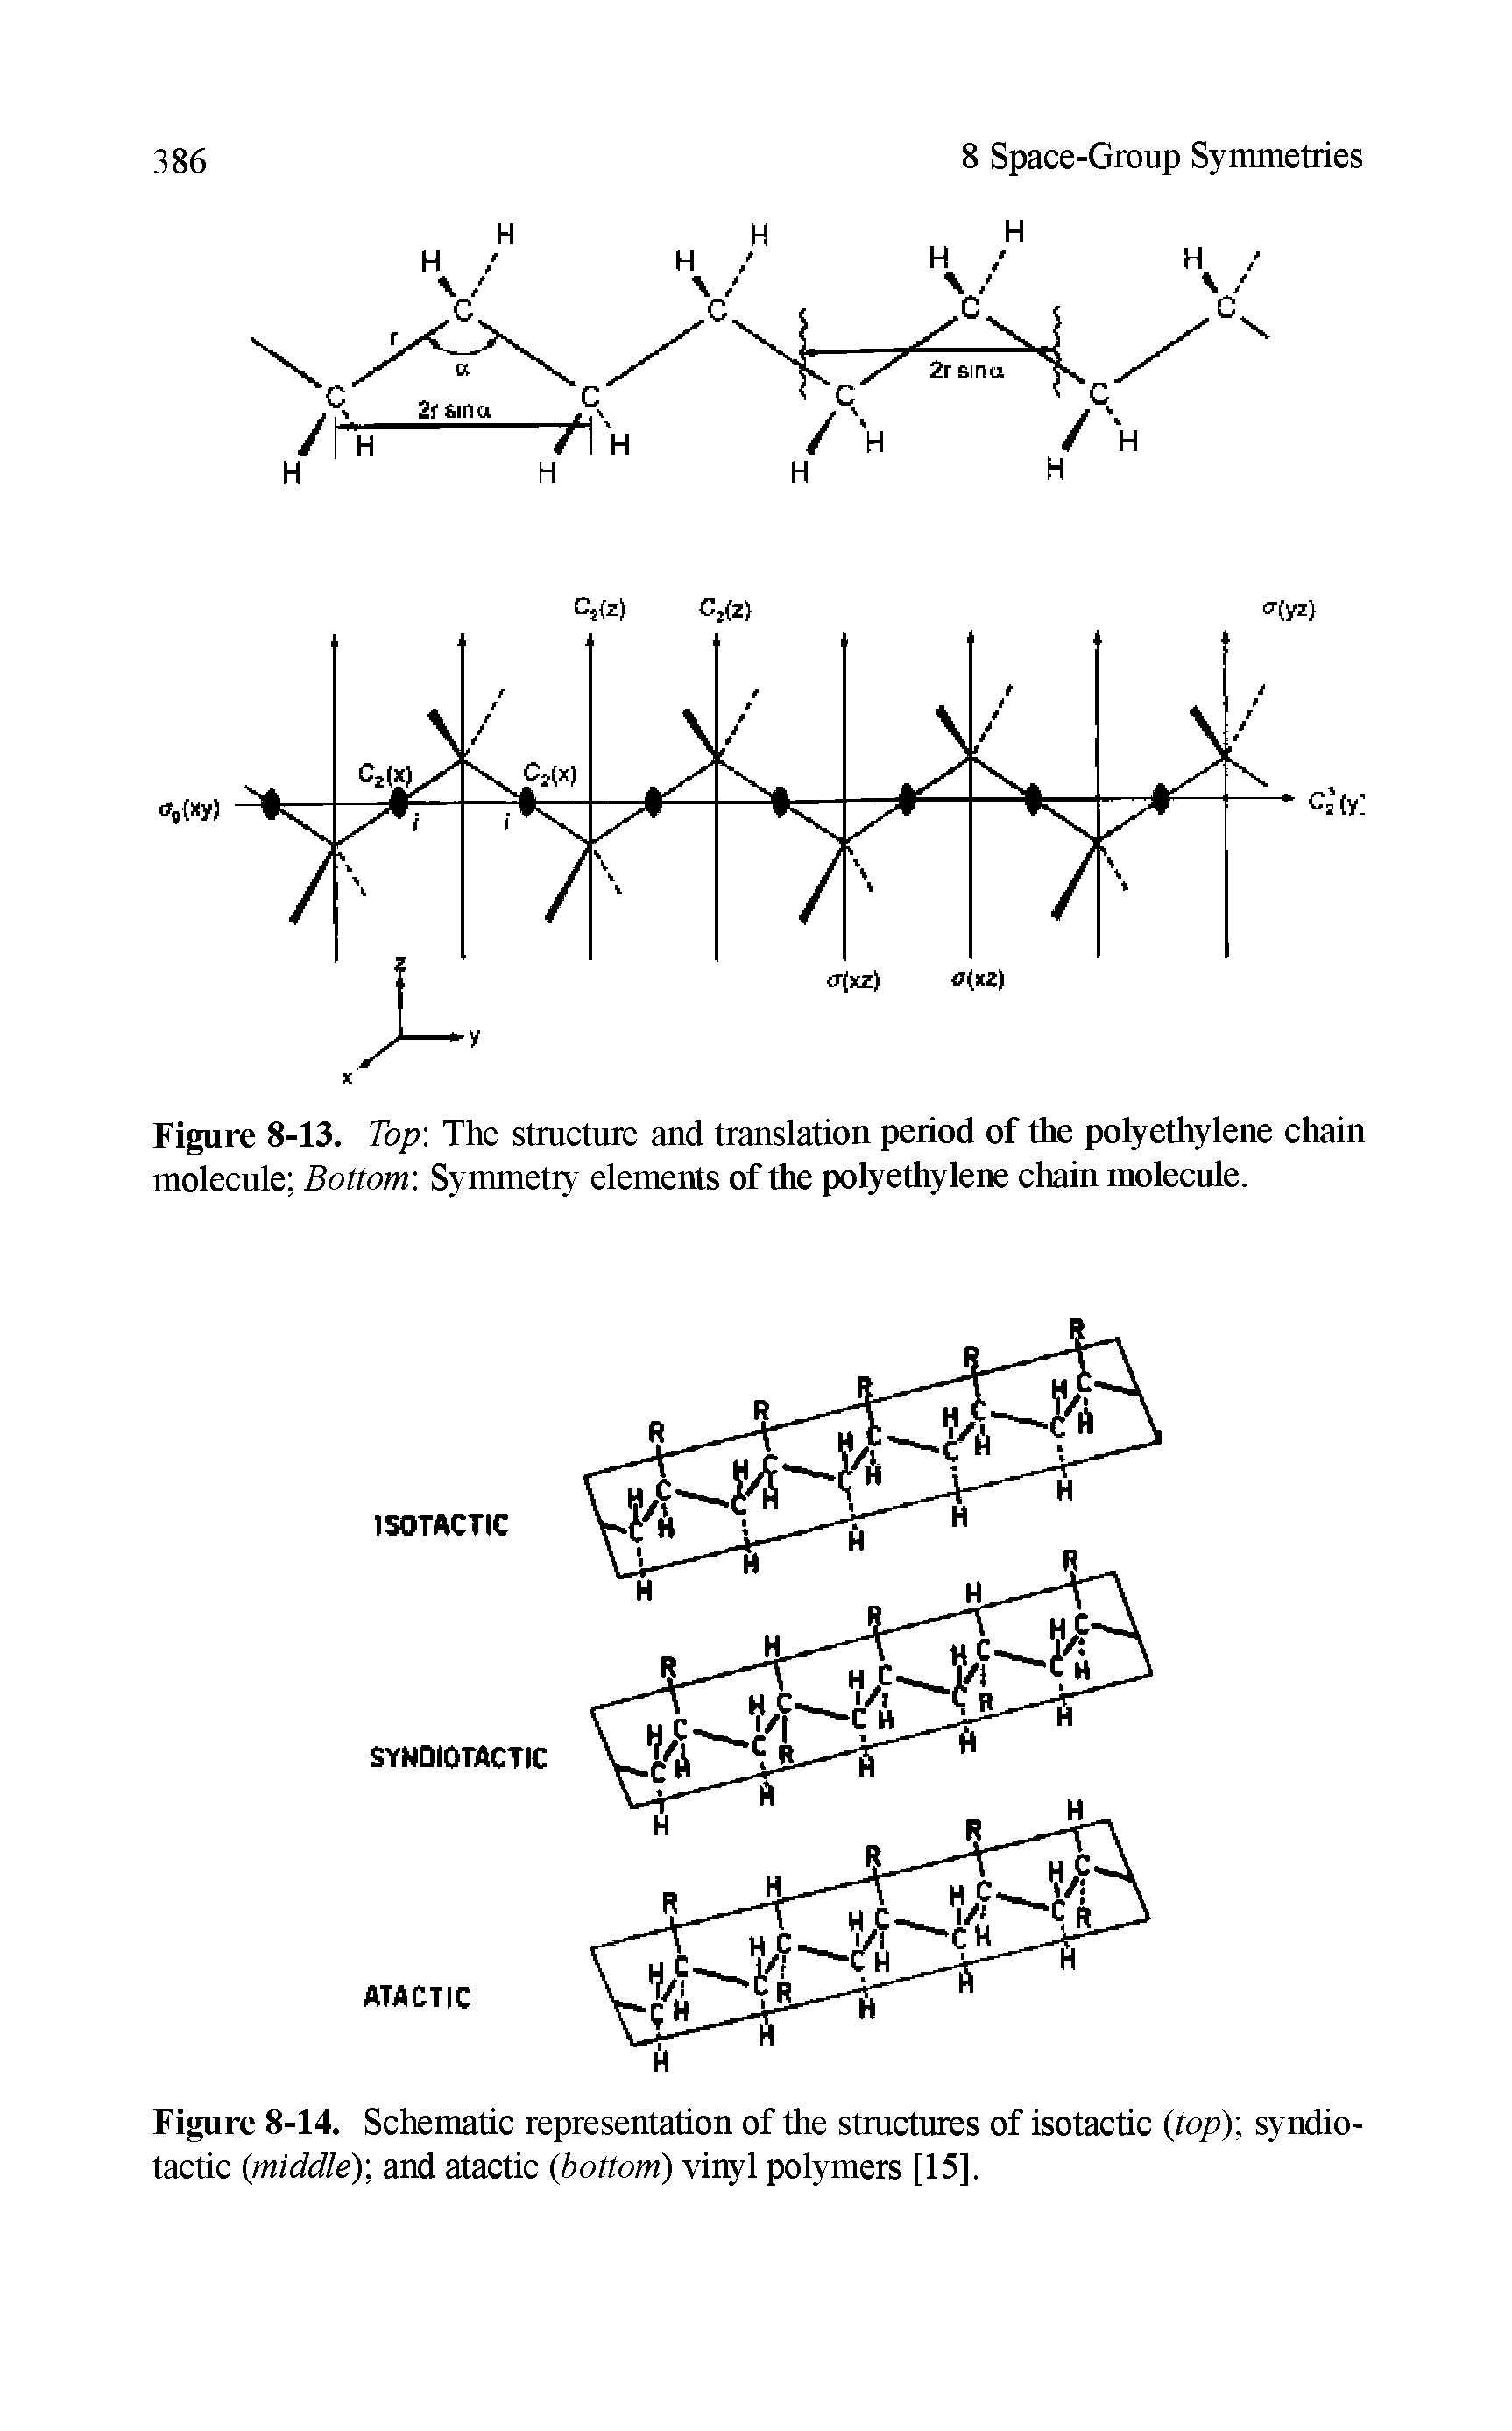 Figure 8-14. Schematic representation of the structures of isotactic (top) syndio-tactic (middle) and atactic (bottom) vinyl polymers [15],...